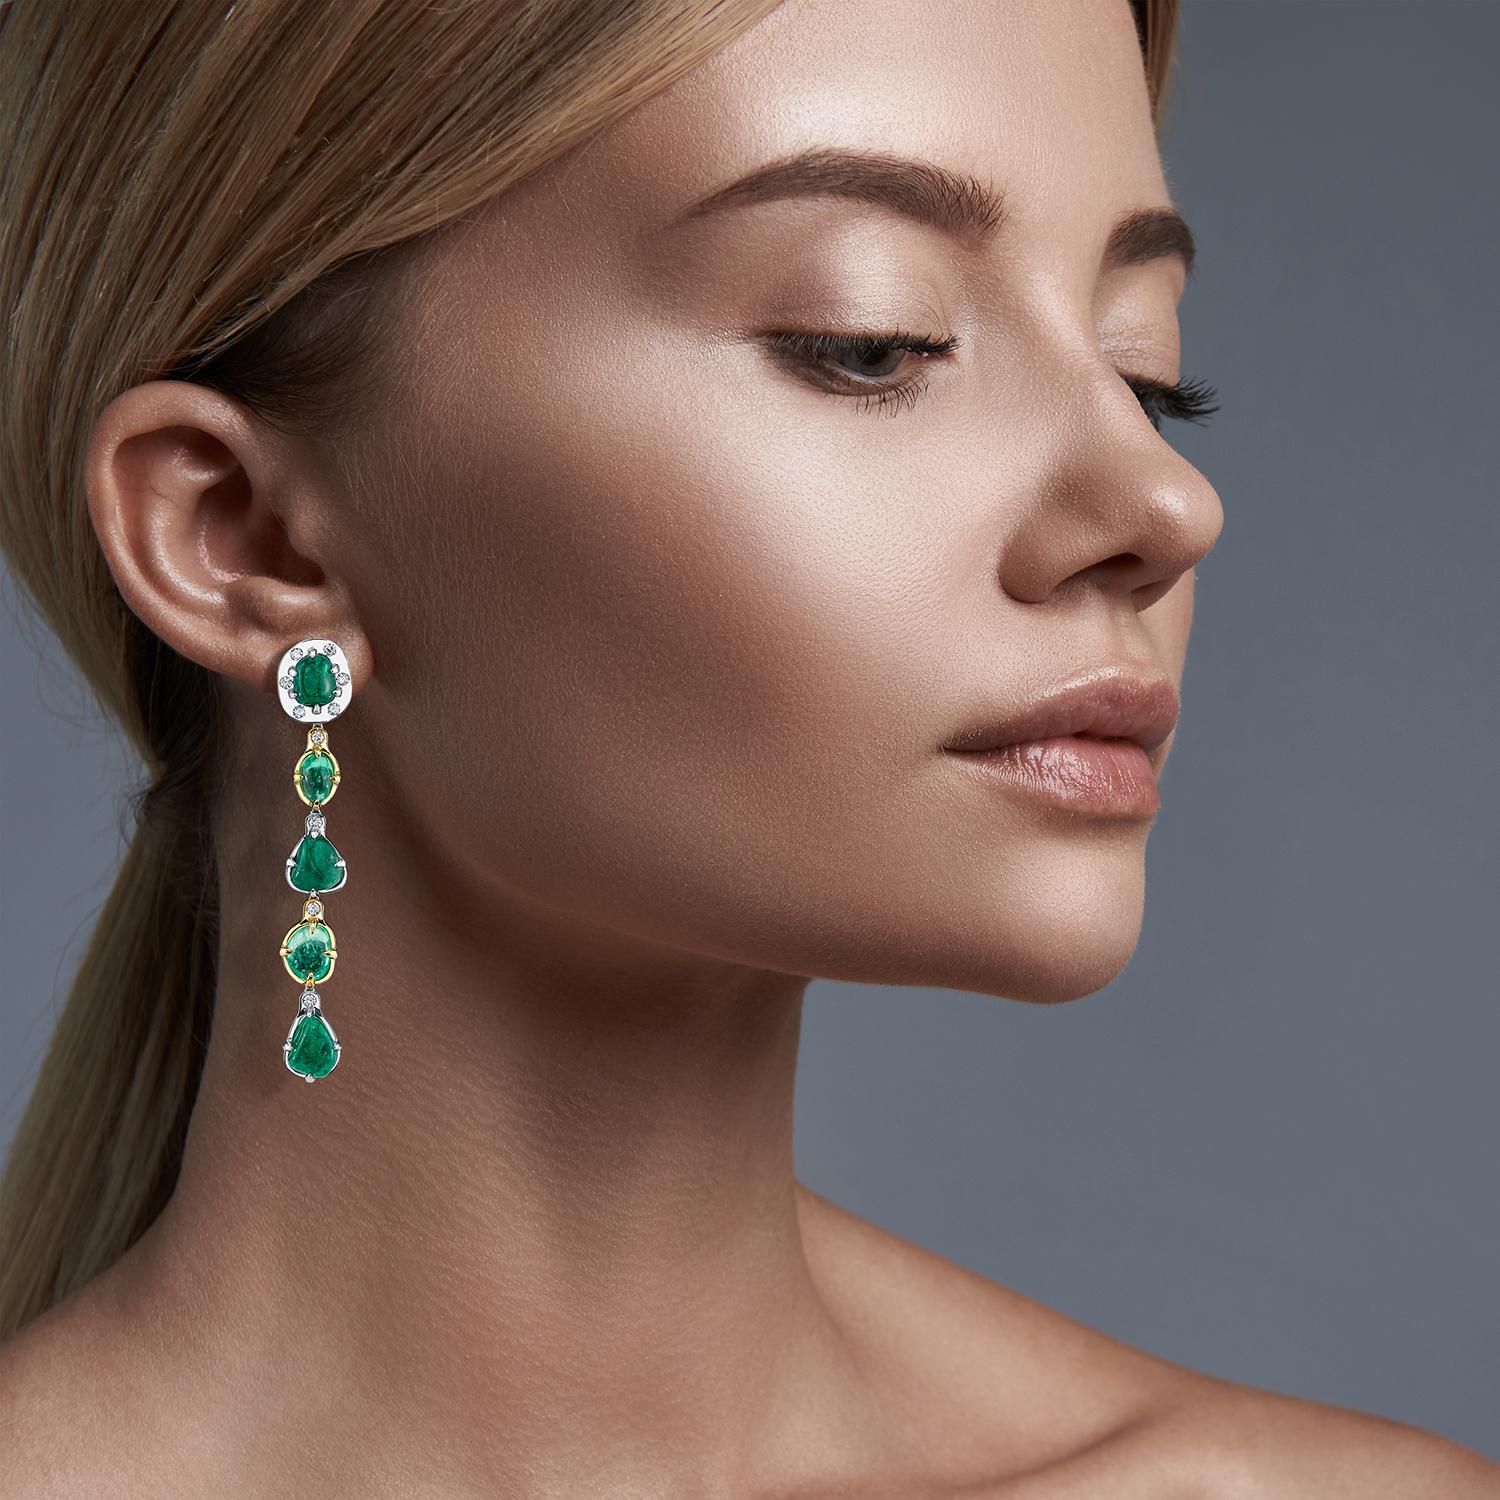 Muzo Emerald Colombia Heritage Muisca Earrings set with 27.32 carats Emerald

Named in honor of the ancient indigenous people of the Muzo region of Colombia, the Muiscas are one of four advanced civilizations of the Americas. As legend has it, the